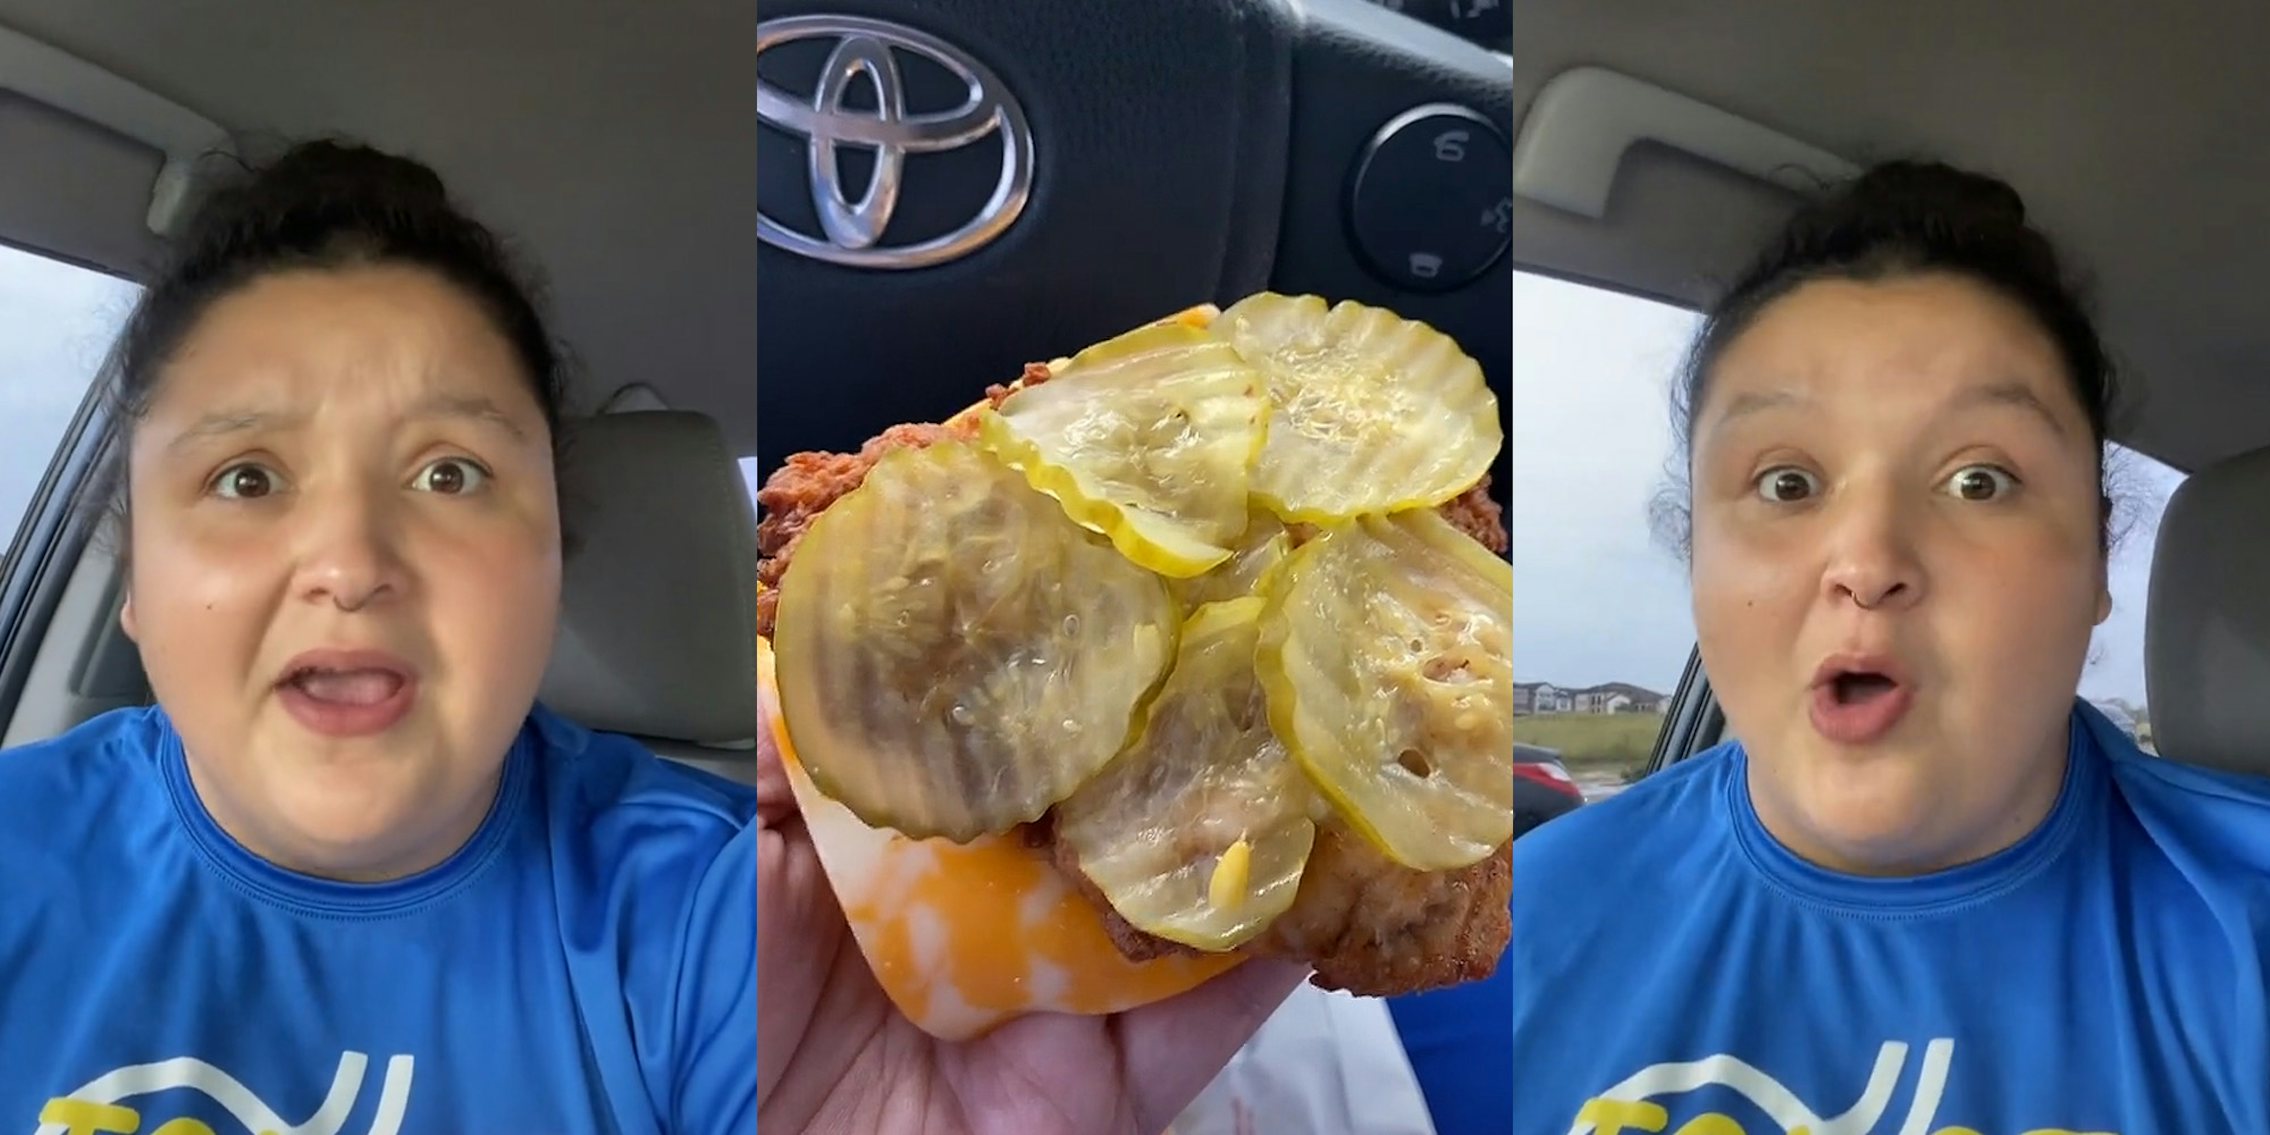 person speaking in car (l) hand holding up chicken covered in pickles (c) person speaking in car (r)